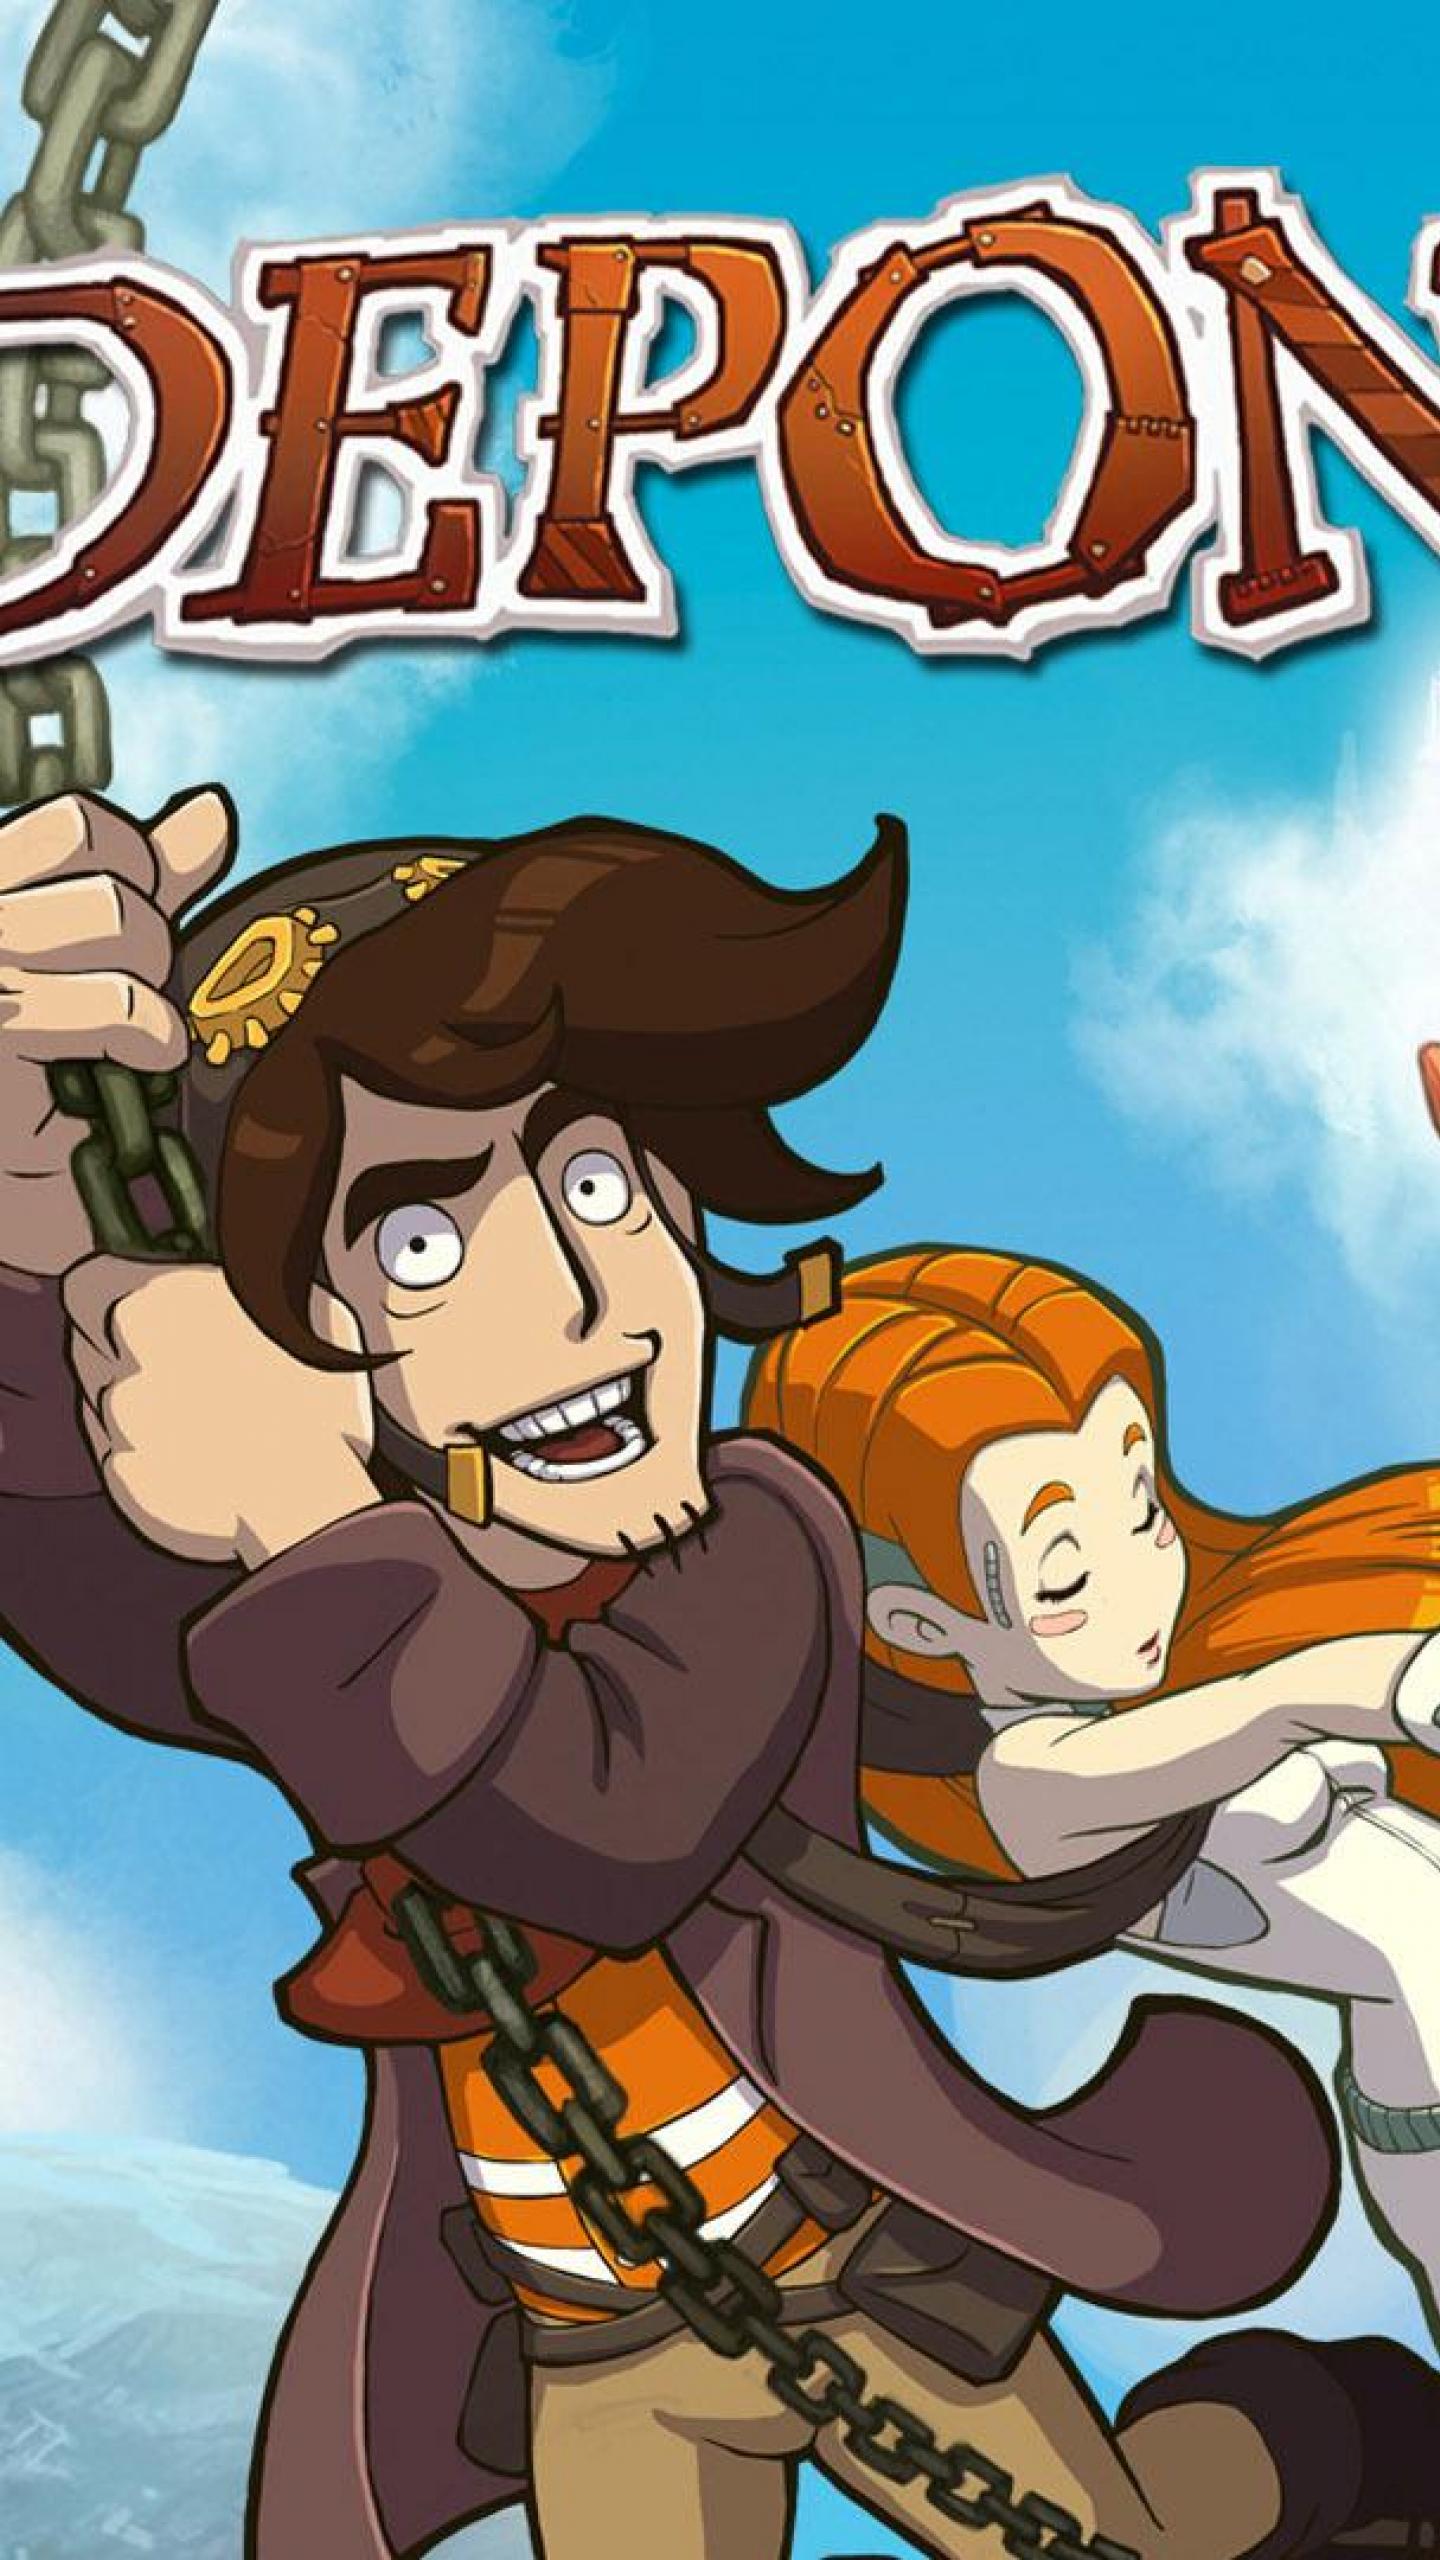 Samsung Galaxy Note 4, 5, Samsung Galaxy S6, S6 Edge - Deponia Review , HD Wallpaper & Backgrounds